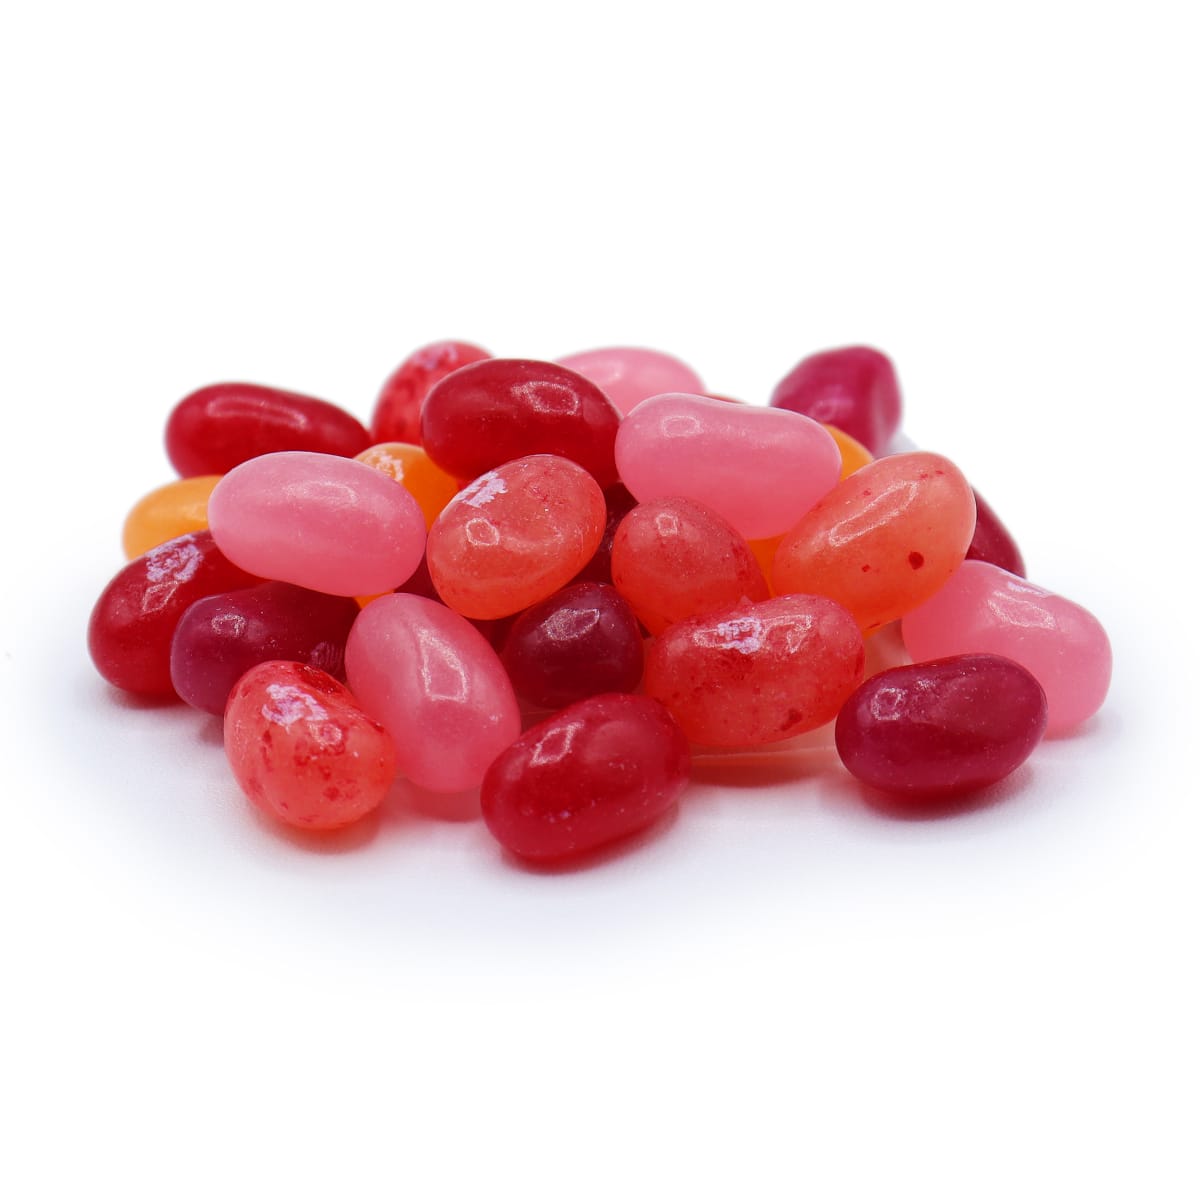 Grape, Marshmallow, and Orange Gummy Mixes. Buy 3 Flavors at Once & SAVE!